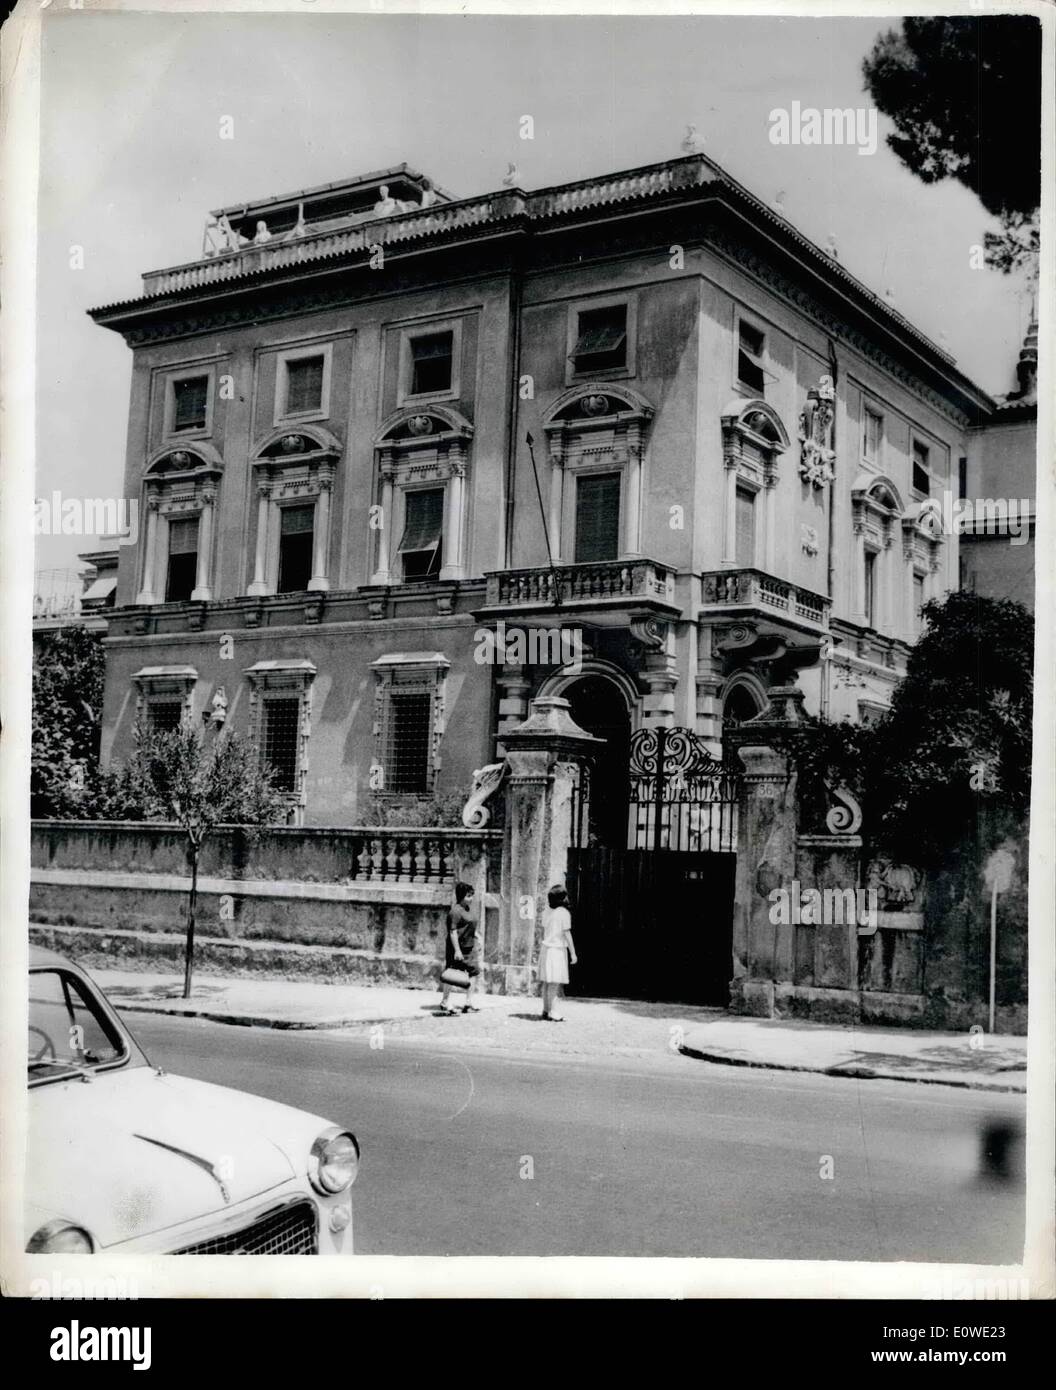 Jul. 07, 1962 - Rainier seeks refuge in Rome from de Gaulle?.: Prince Rainier has brought a new villa in Rome and is spending &pound;50,000 refbishing it. Ostensibly it is for a new legation, but well-informed sources reveal that the Prince is thinking of abdioating over a struggle with de Gaulle who is determined to end Monaco's tax privileges. From this month, all Monegasques must register as aliens in France; if no new agreement is reached by October 1, Monaco will become a foreign state ringes by customs Stock Photo